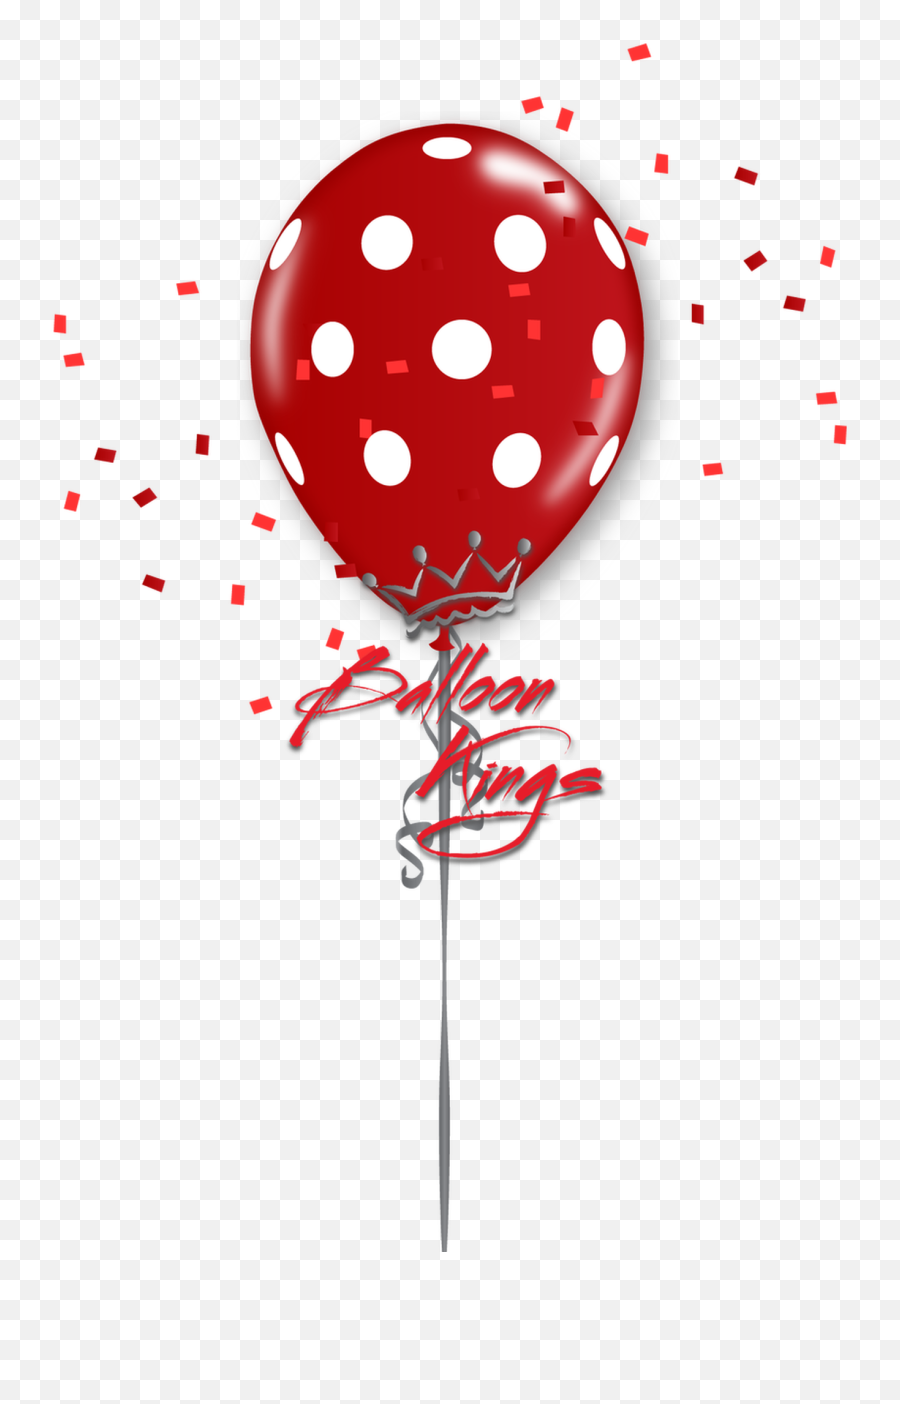 11in Red Polka Dots - Full Hd Editing Background Png,Polka Dots Png